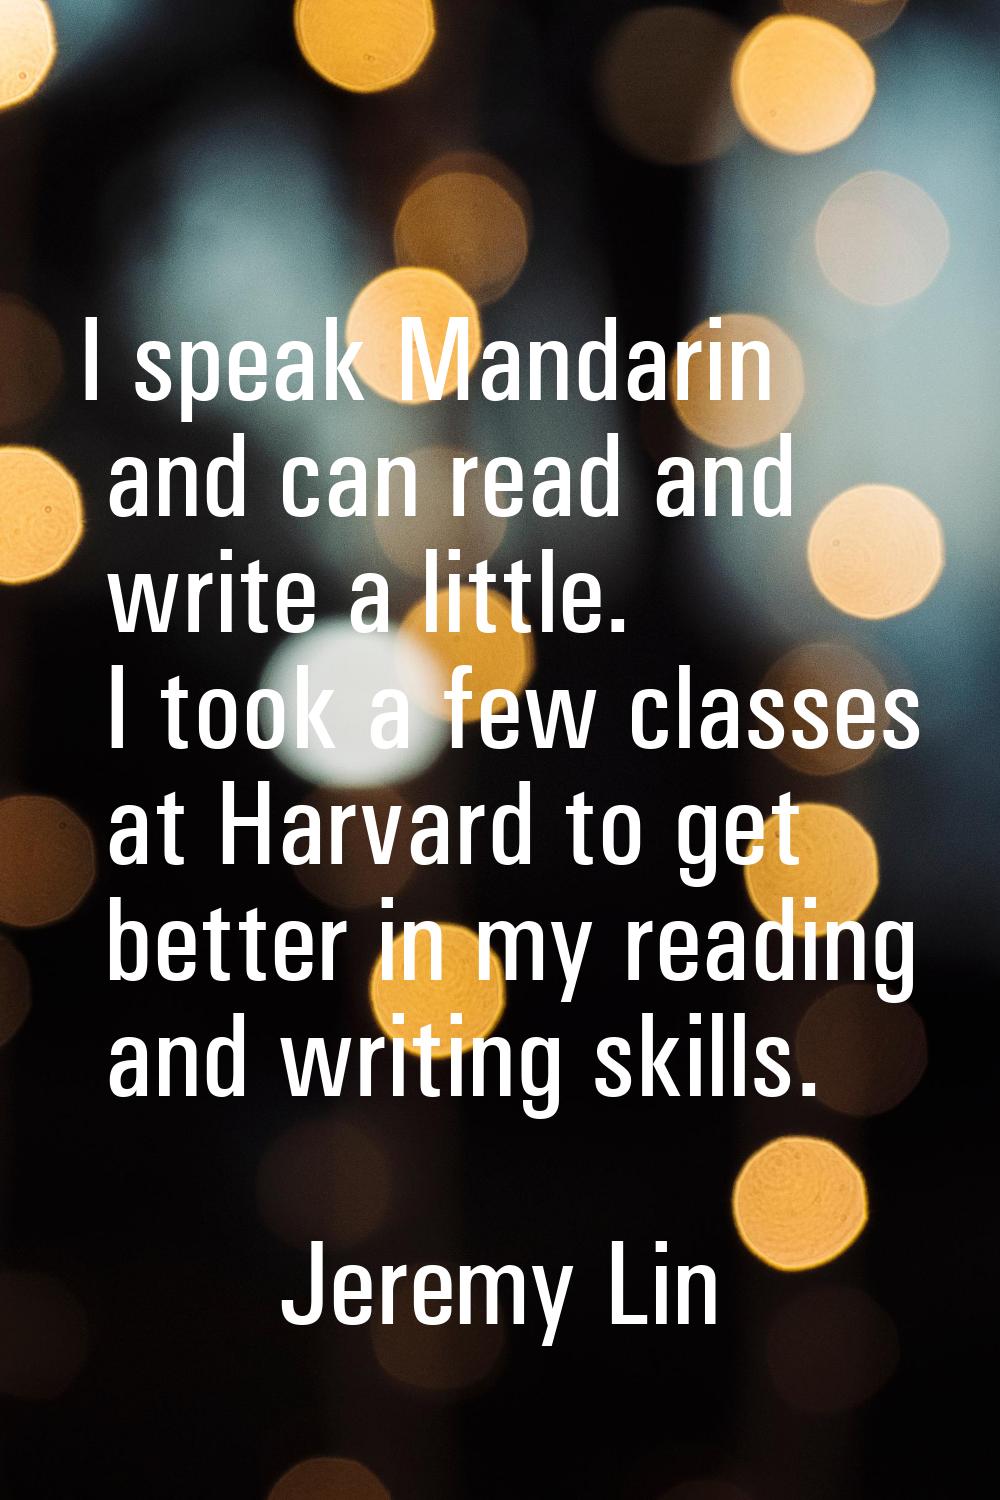 I speak Mandarin and can read and write a little. I took a few classes at Harvard to get better in 